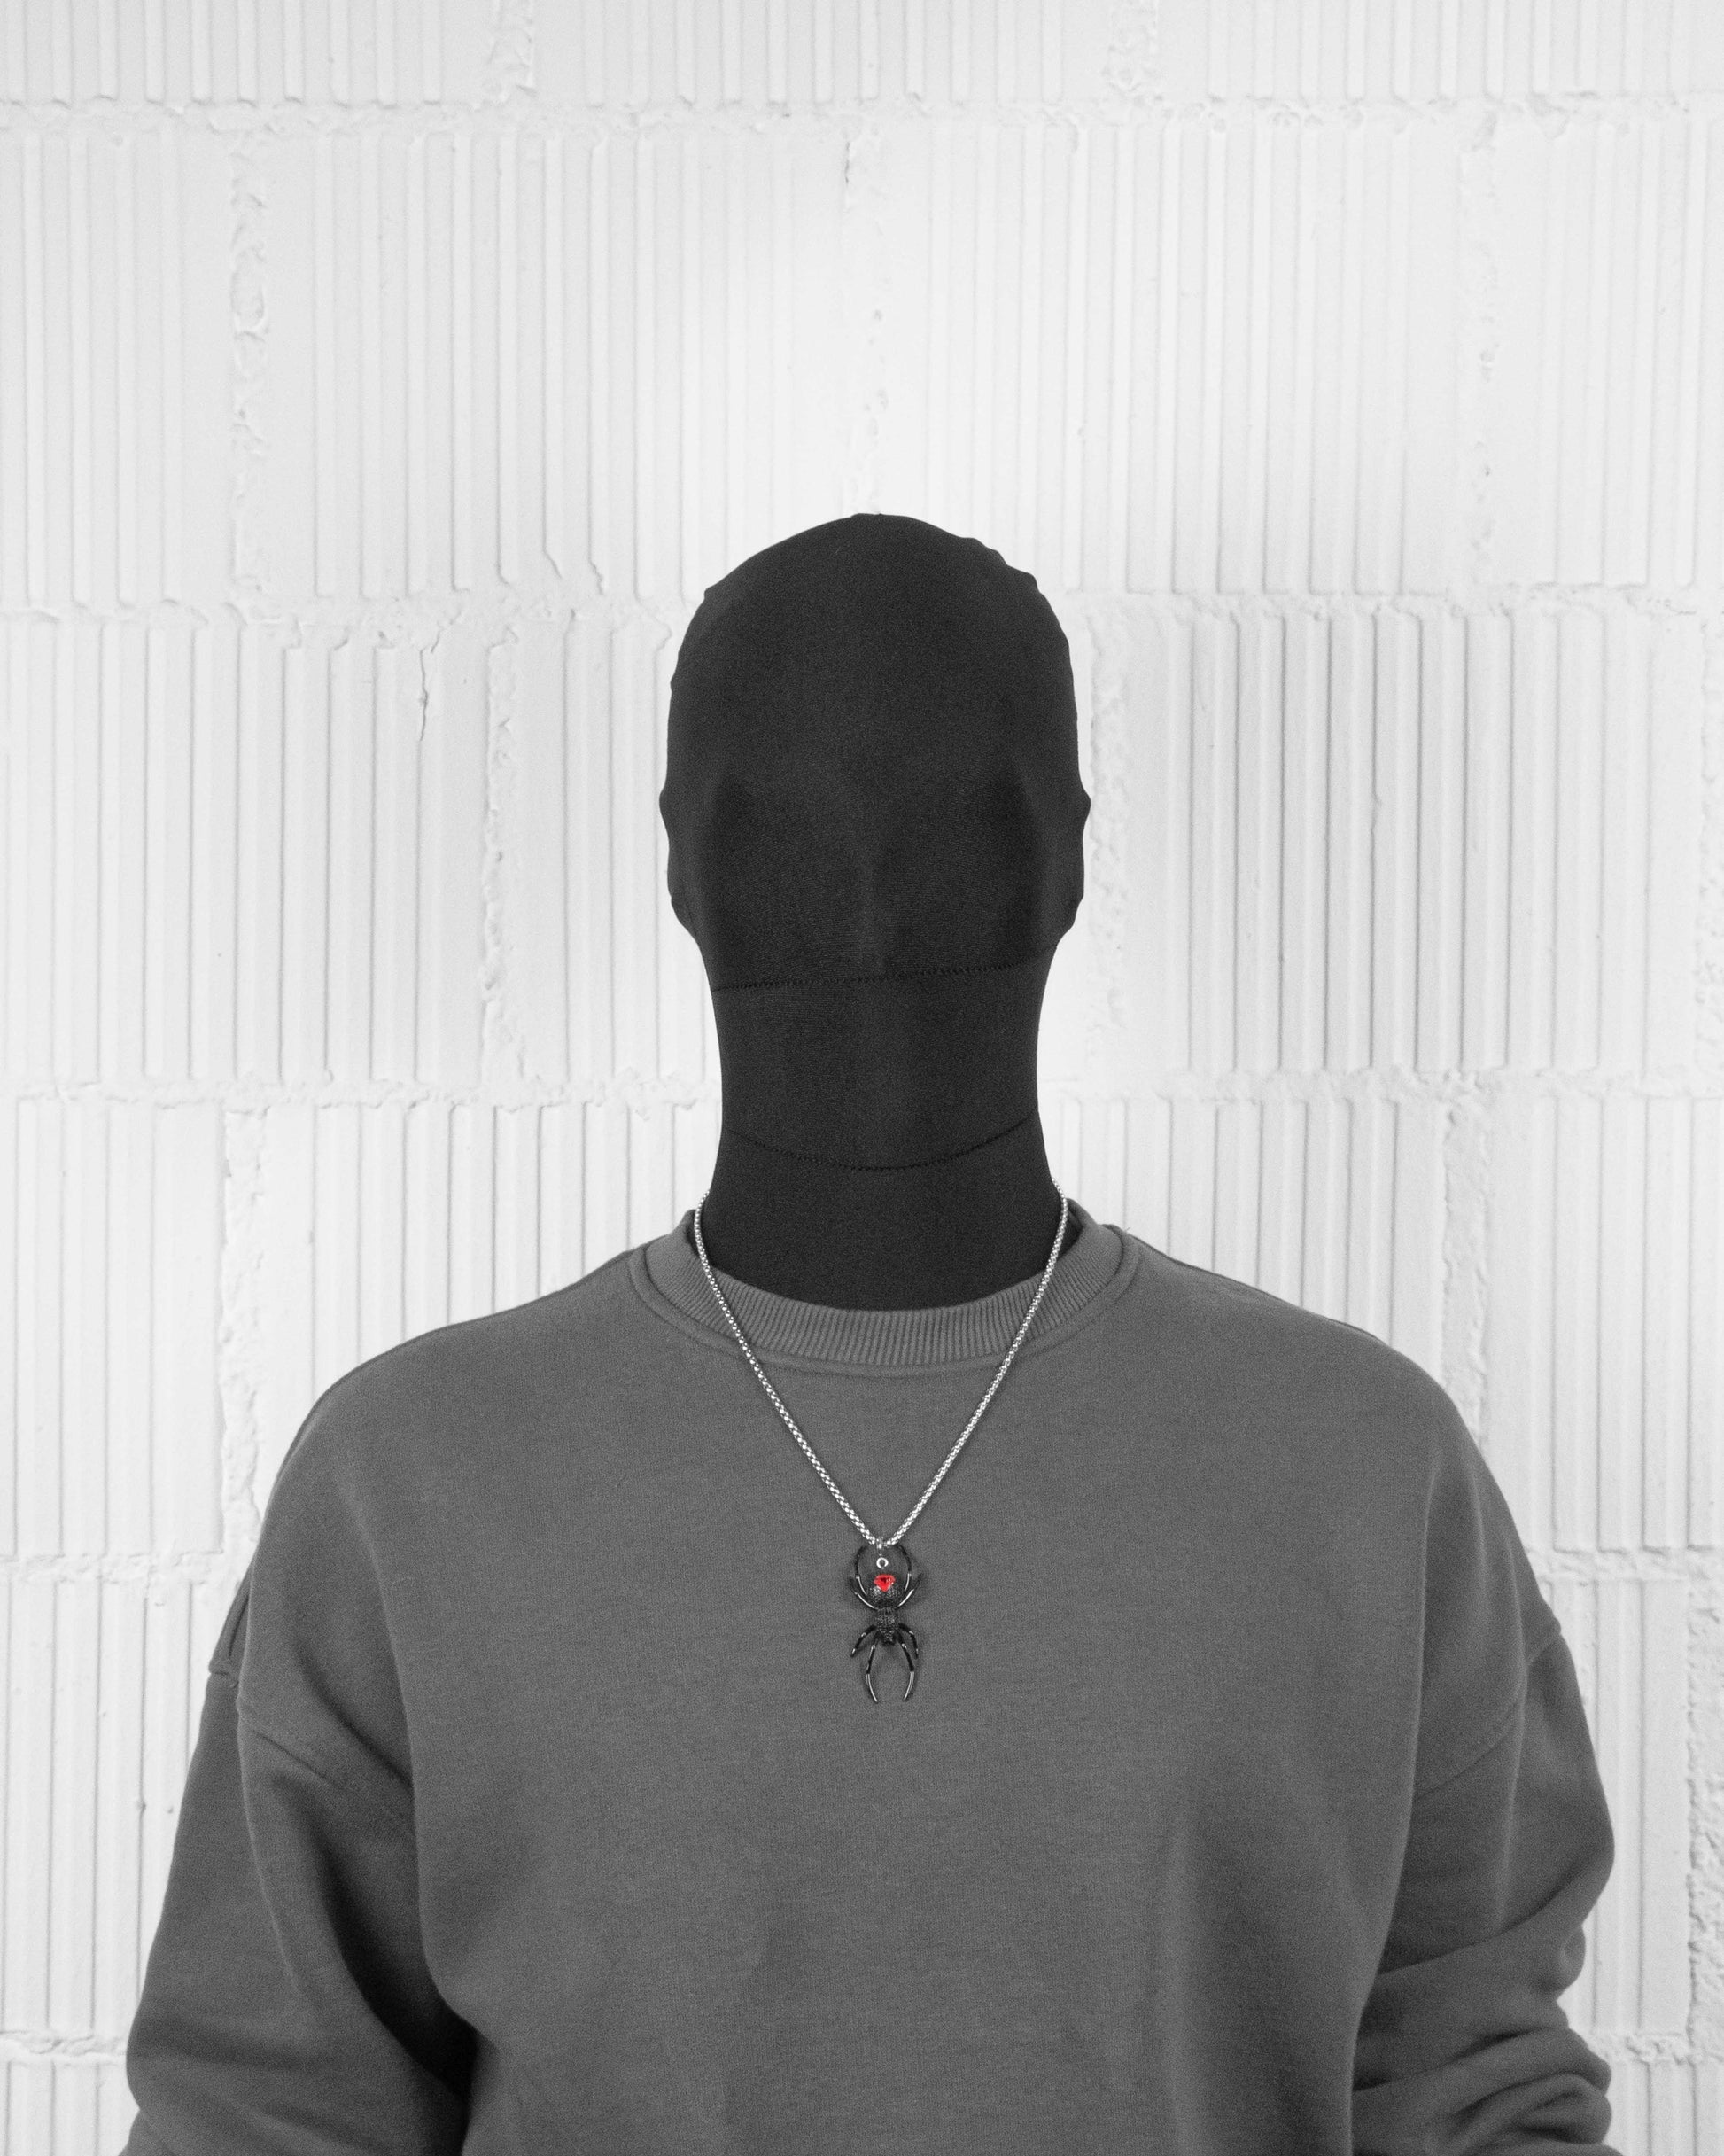 man with black suit wearing Black PVD coated black widow pendant necklace with hand-set micropavé stones in black, metal details, red enamel finishing and 3mm box chain